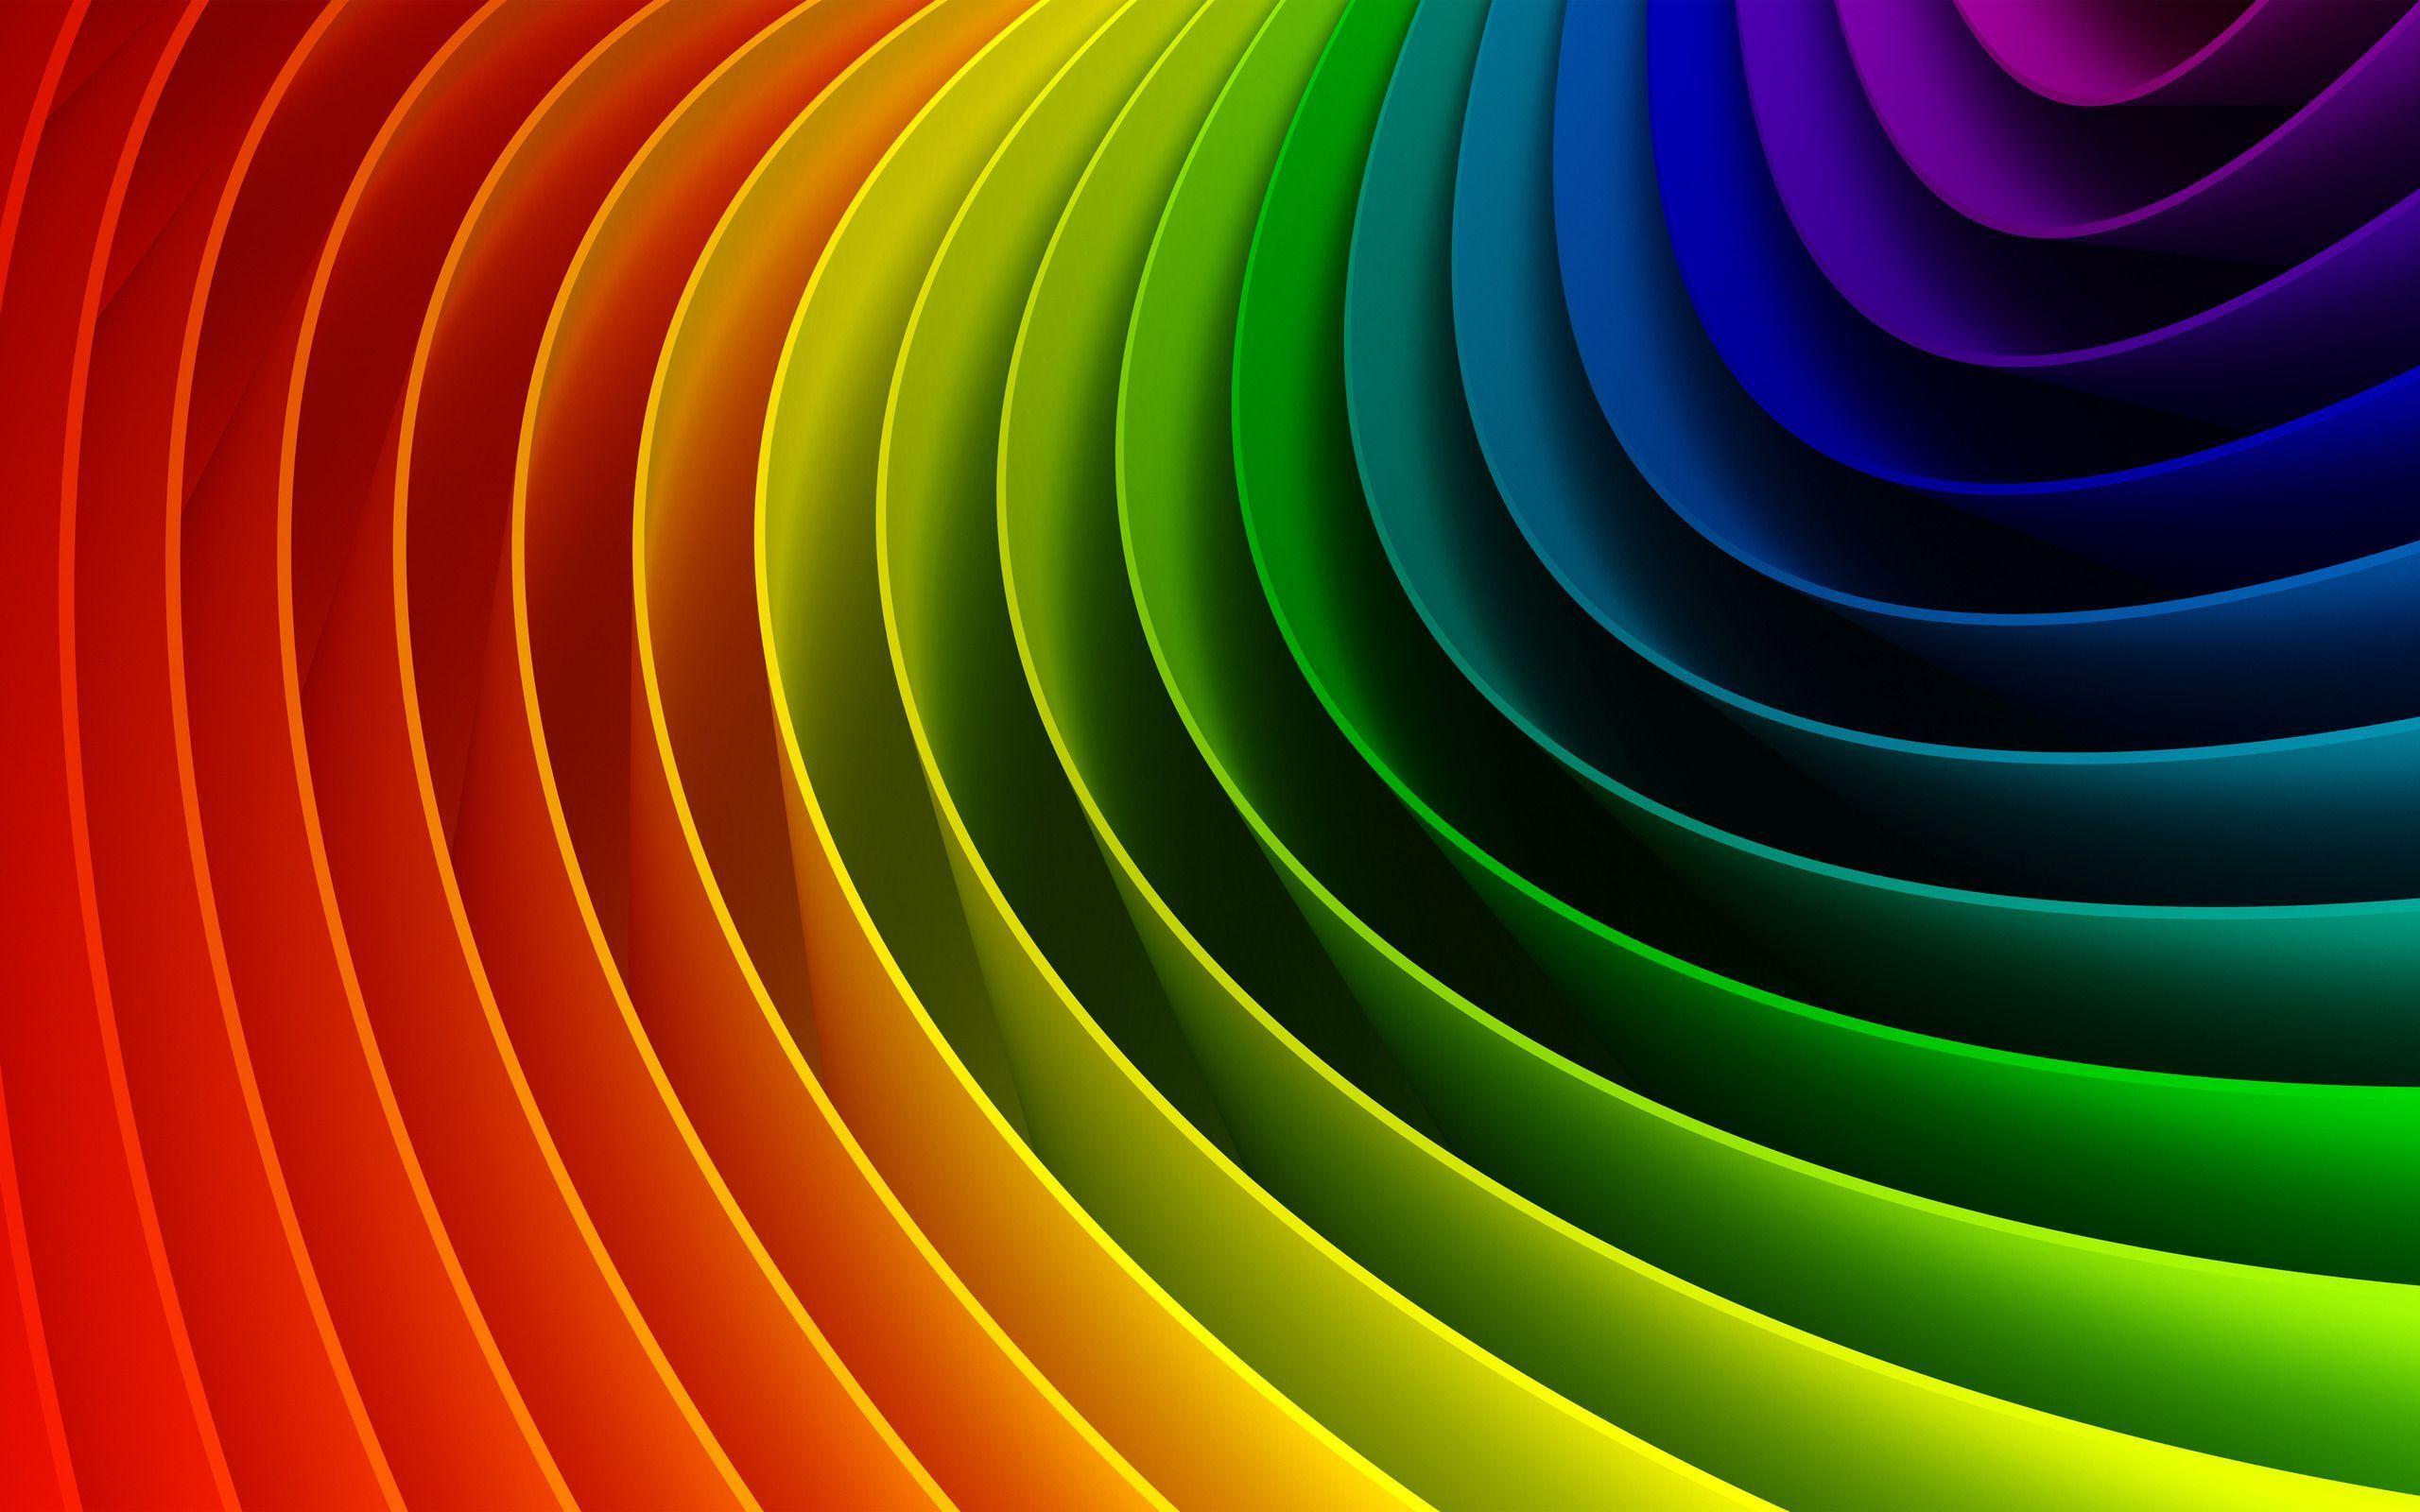 Color spectrum wallpaper and image, picture, photo